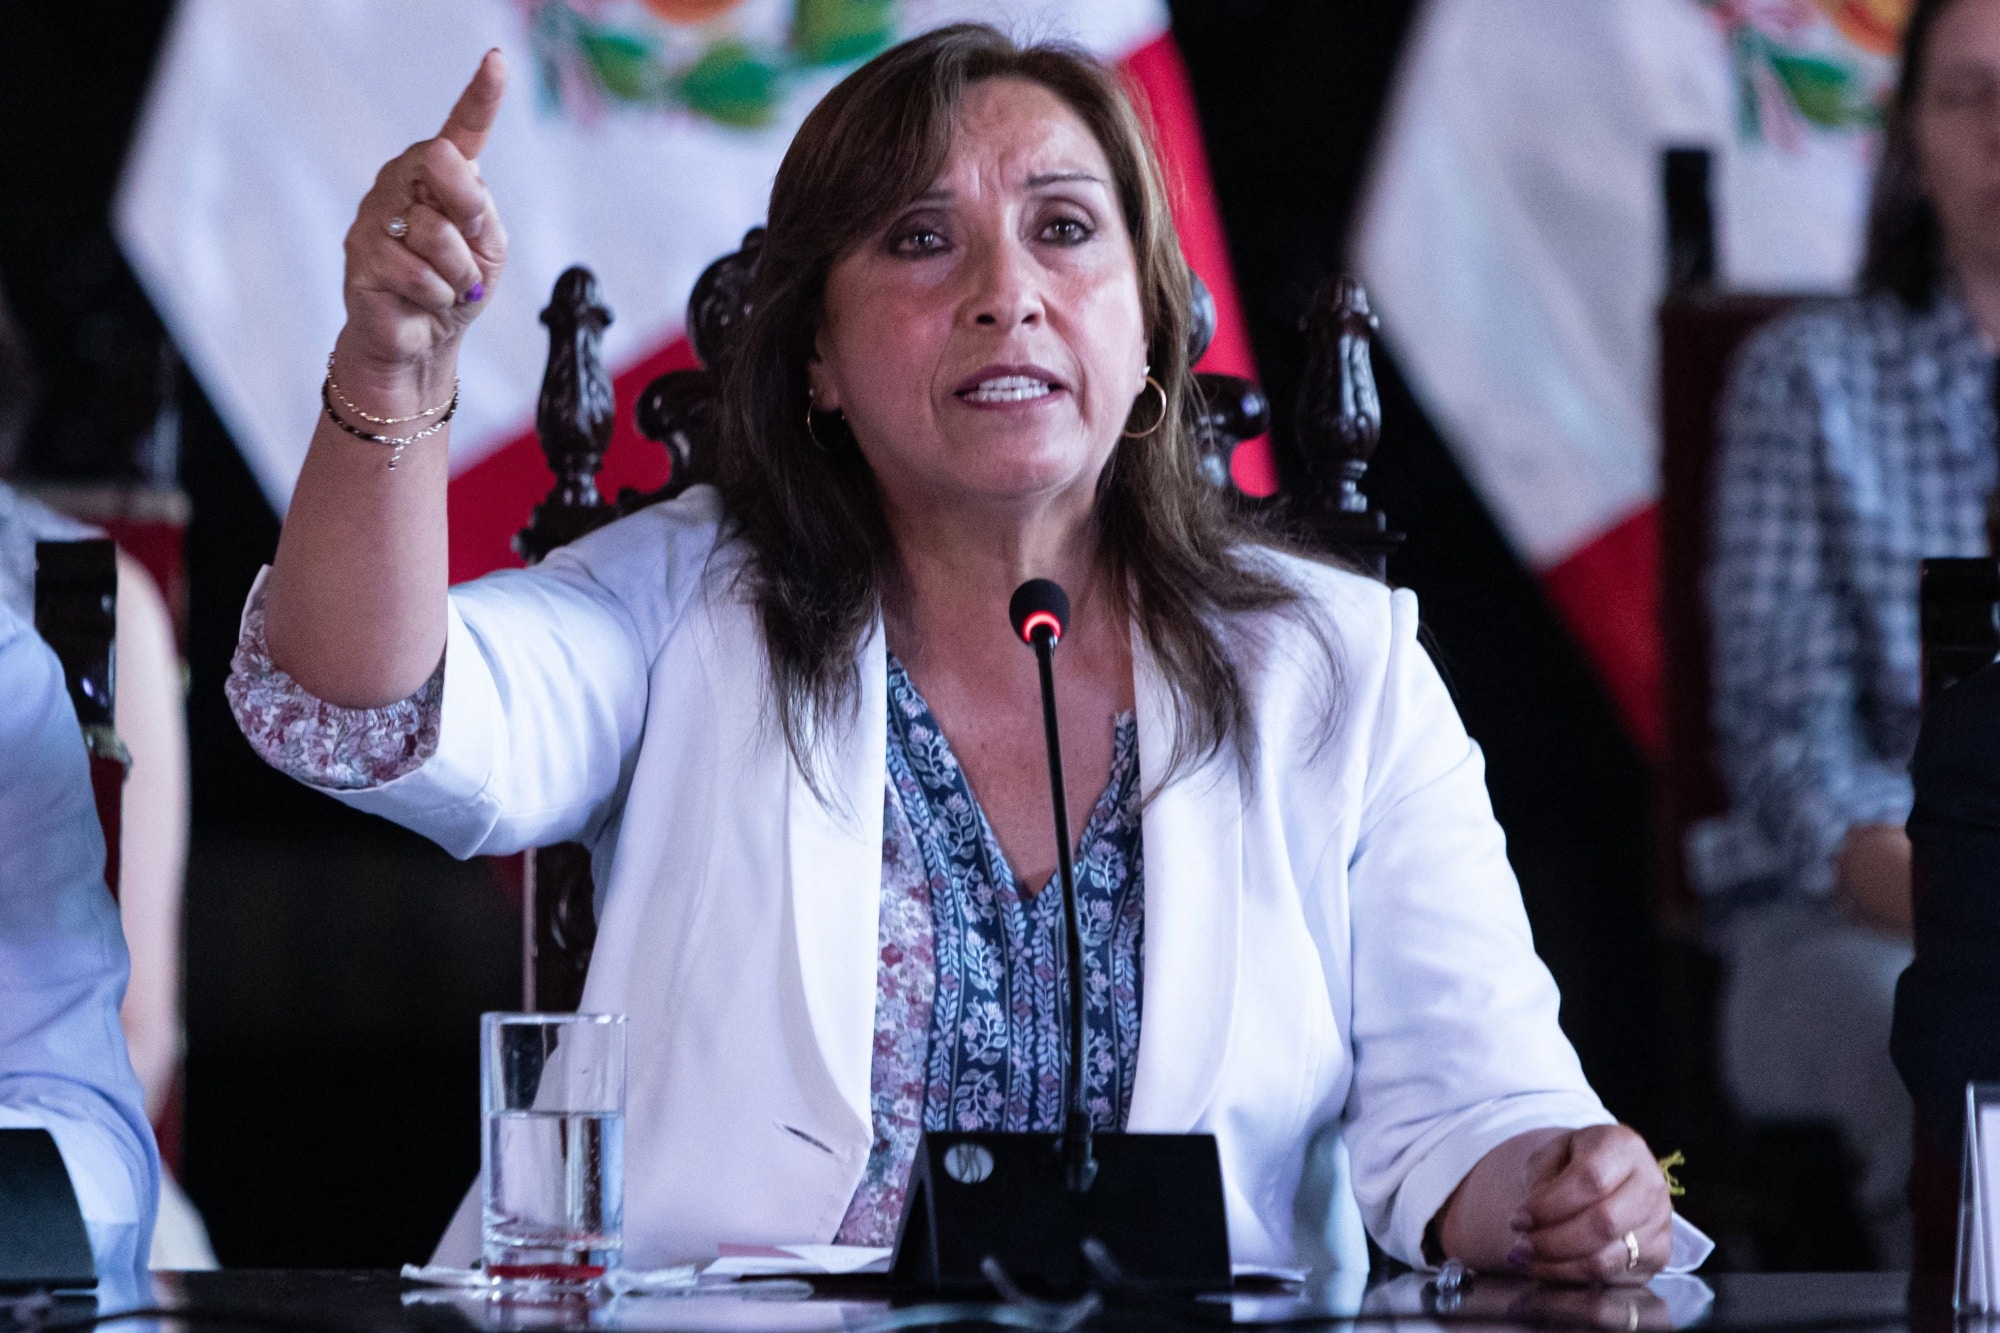 De facto president of Peru Dina Boluarte speaking during a conference at the Government Palace in Lima in late 2022. Photo: Lucas Aguayo/AFP/Getty Images.